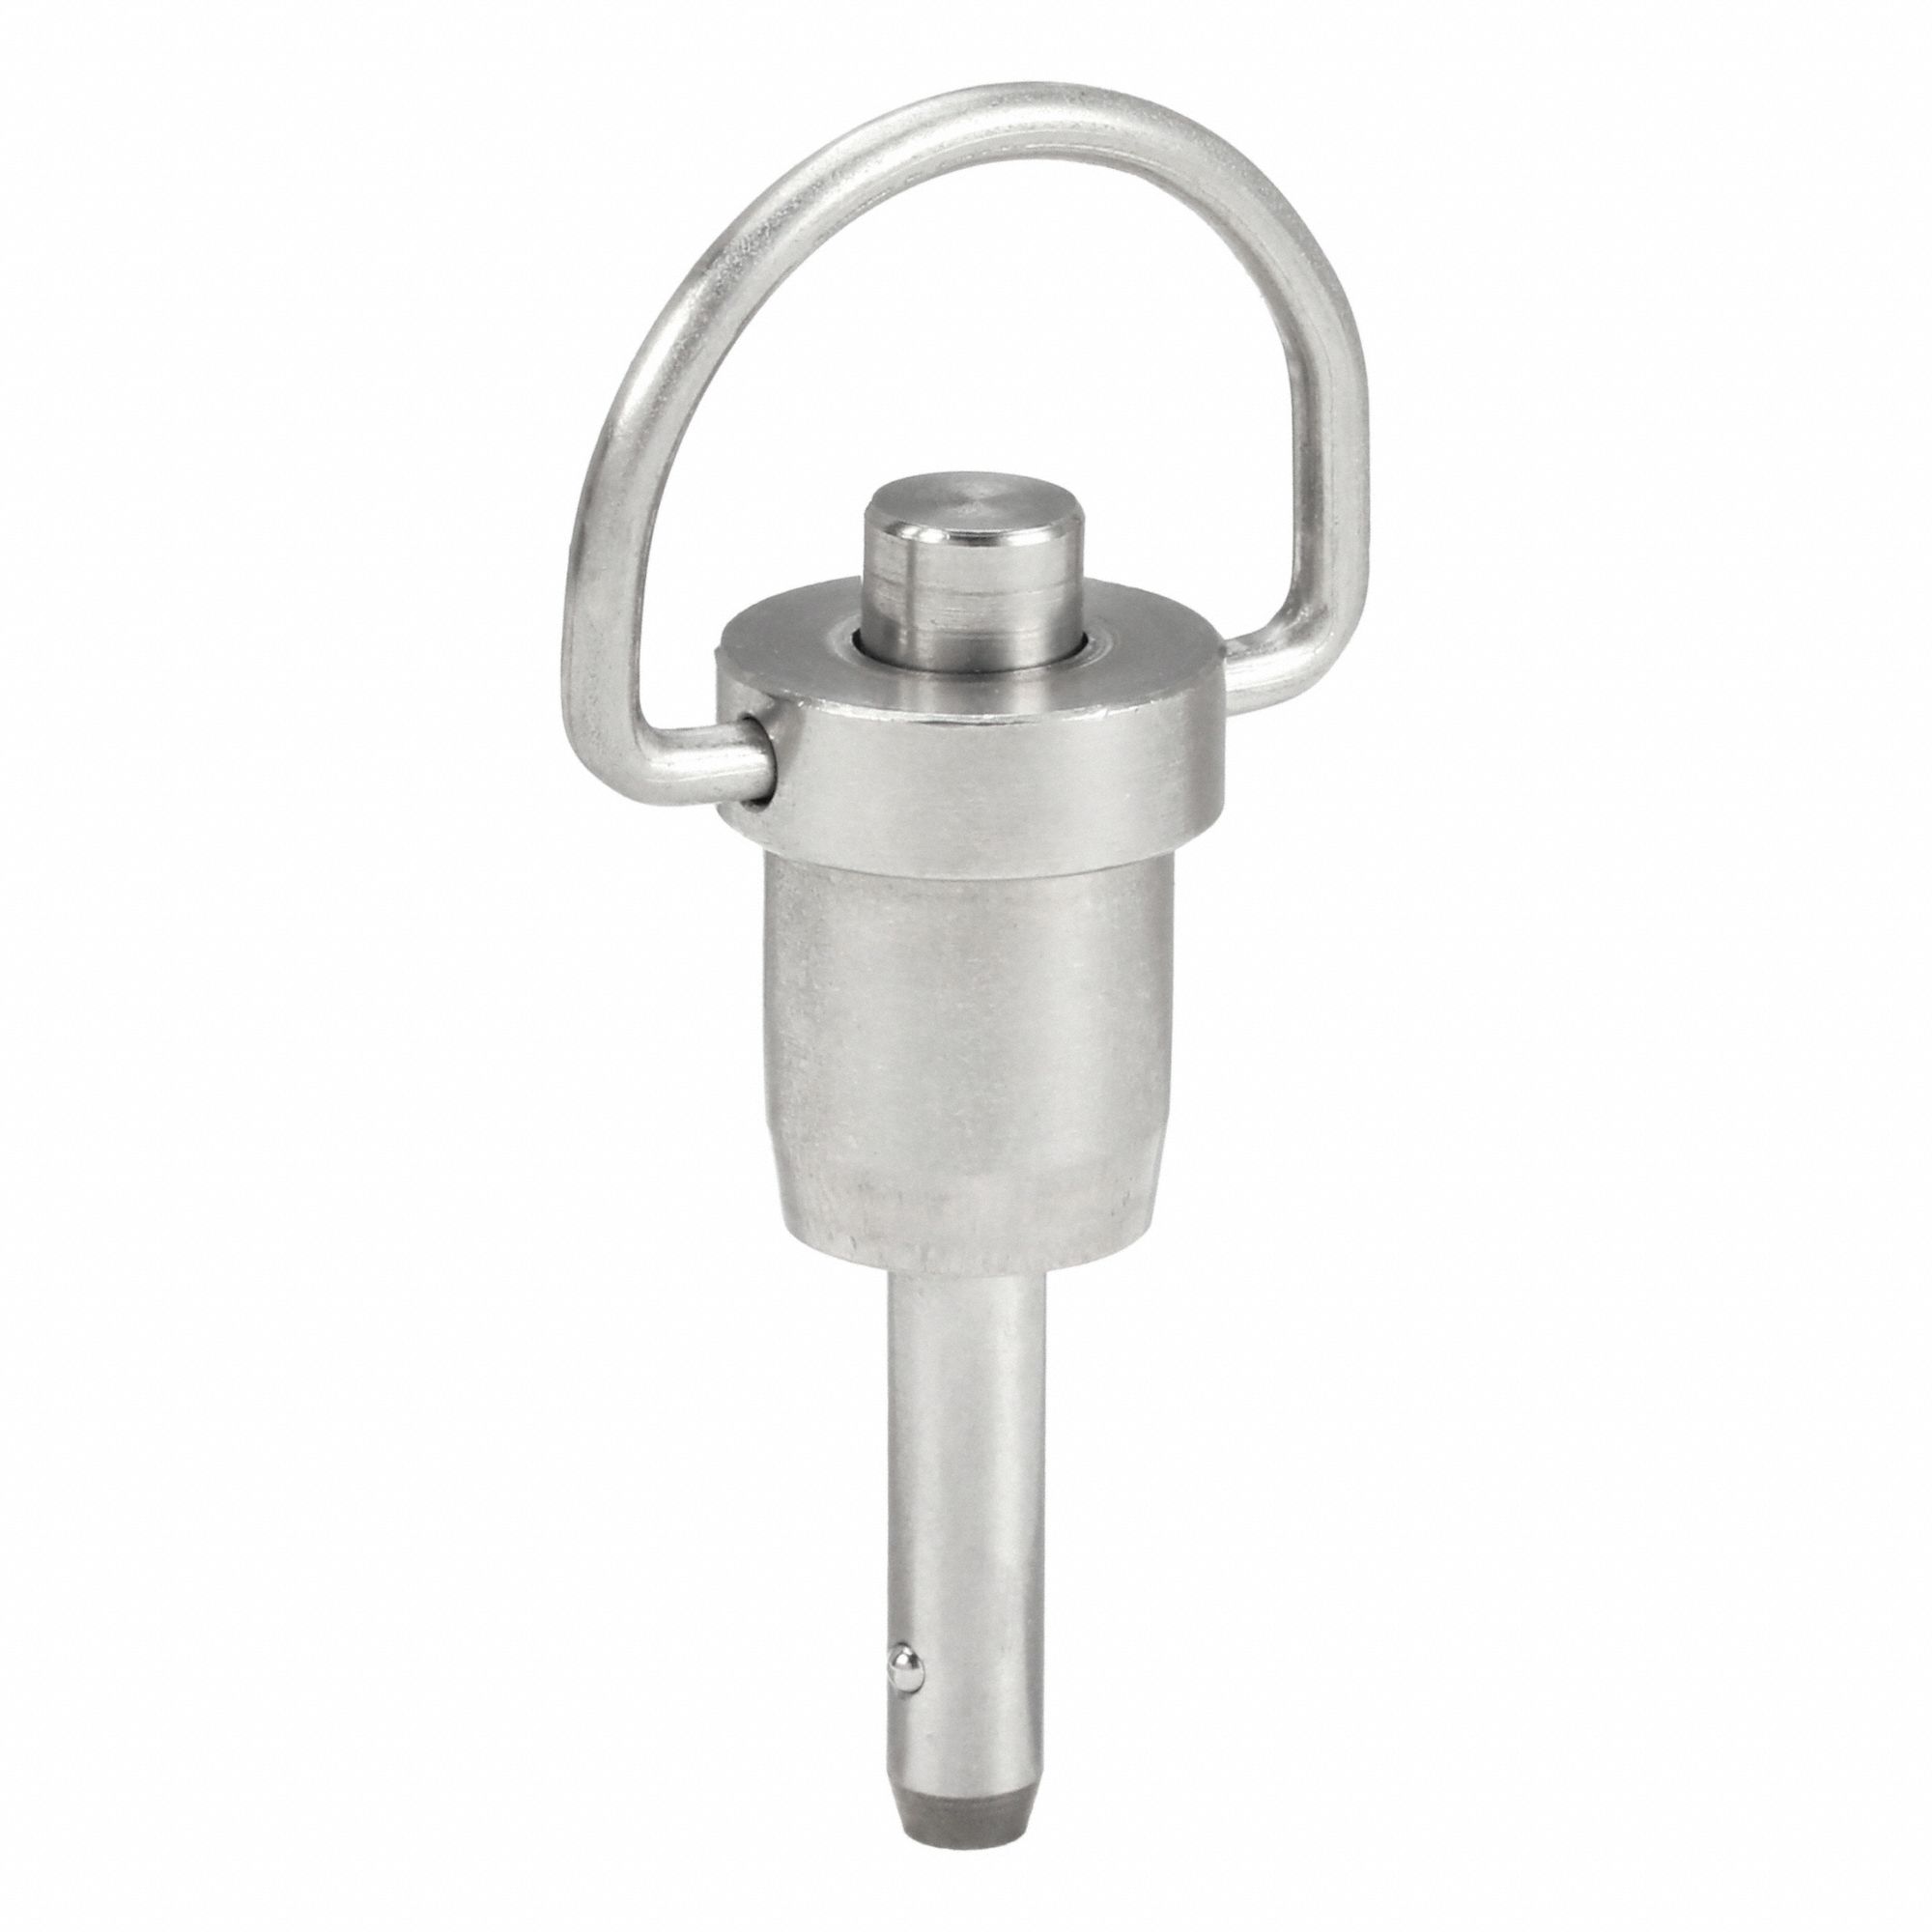 Push Button Positive Locking Pins and Ball Lock Pins by Innovative